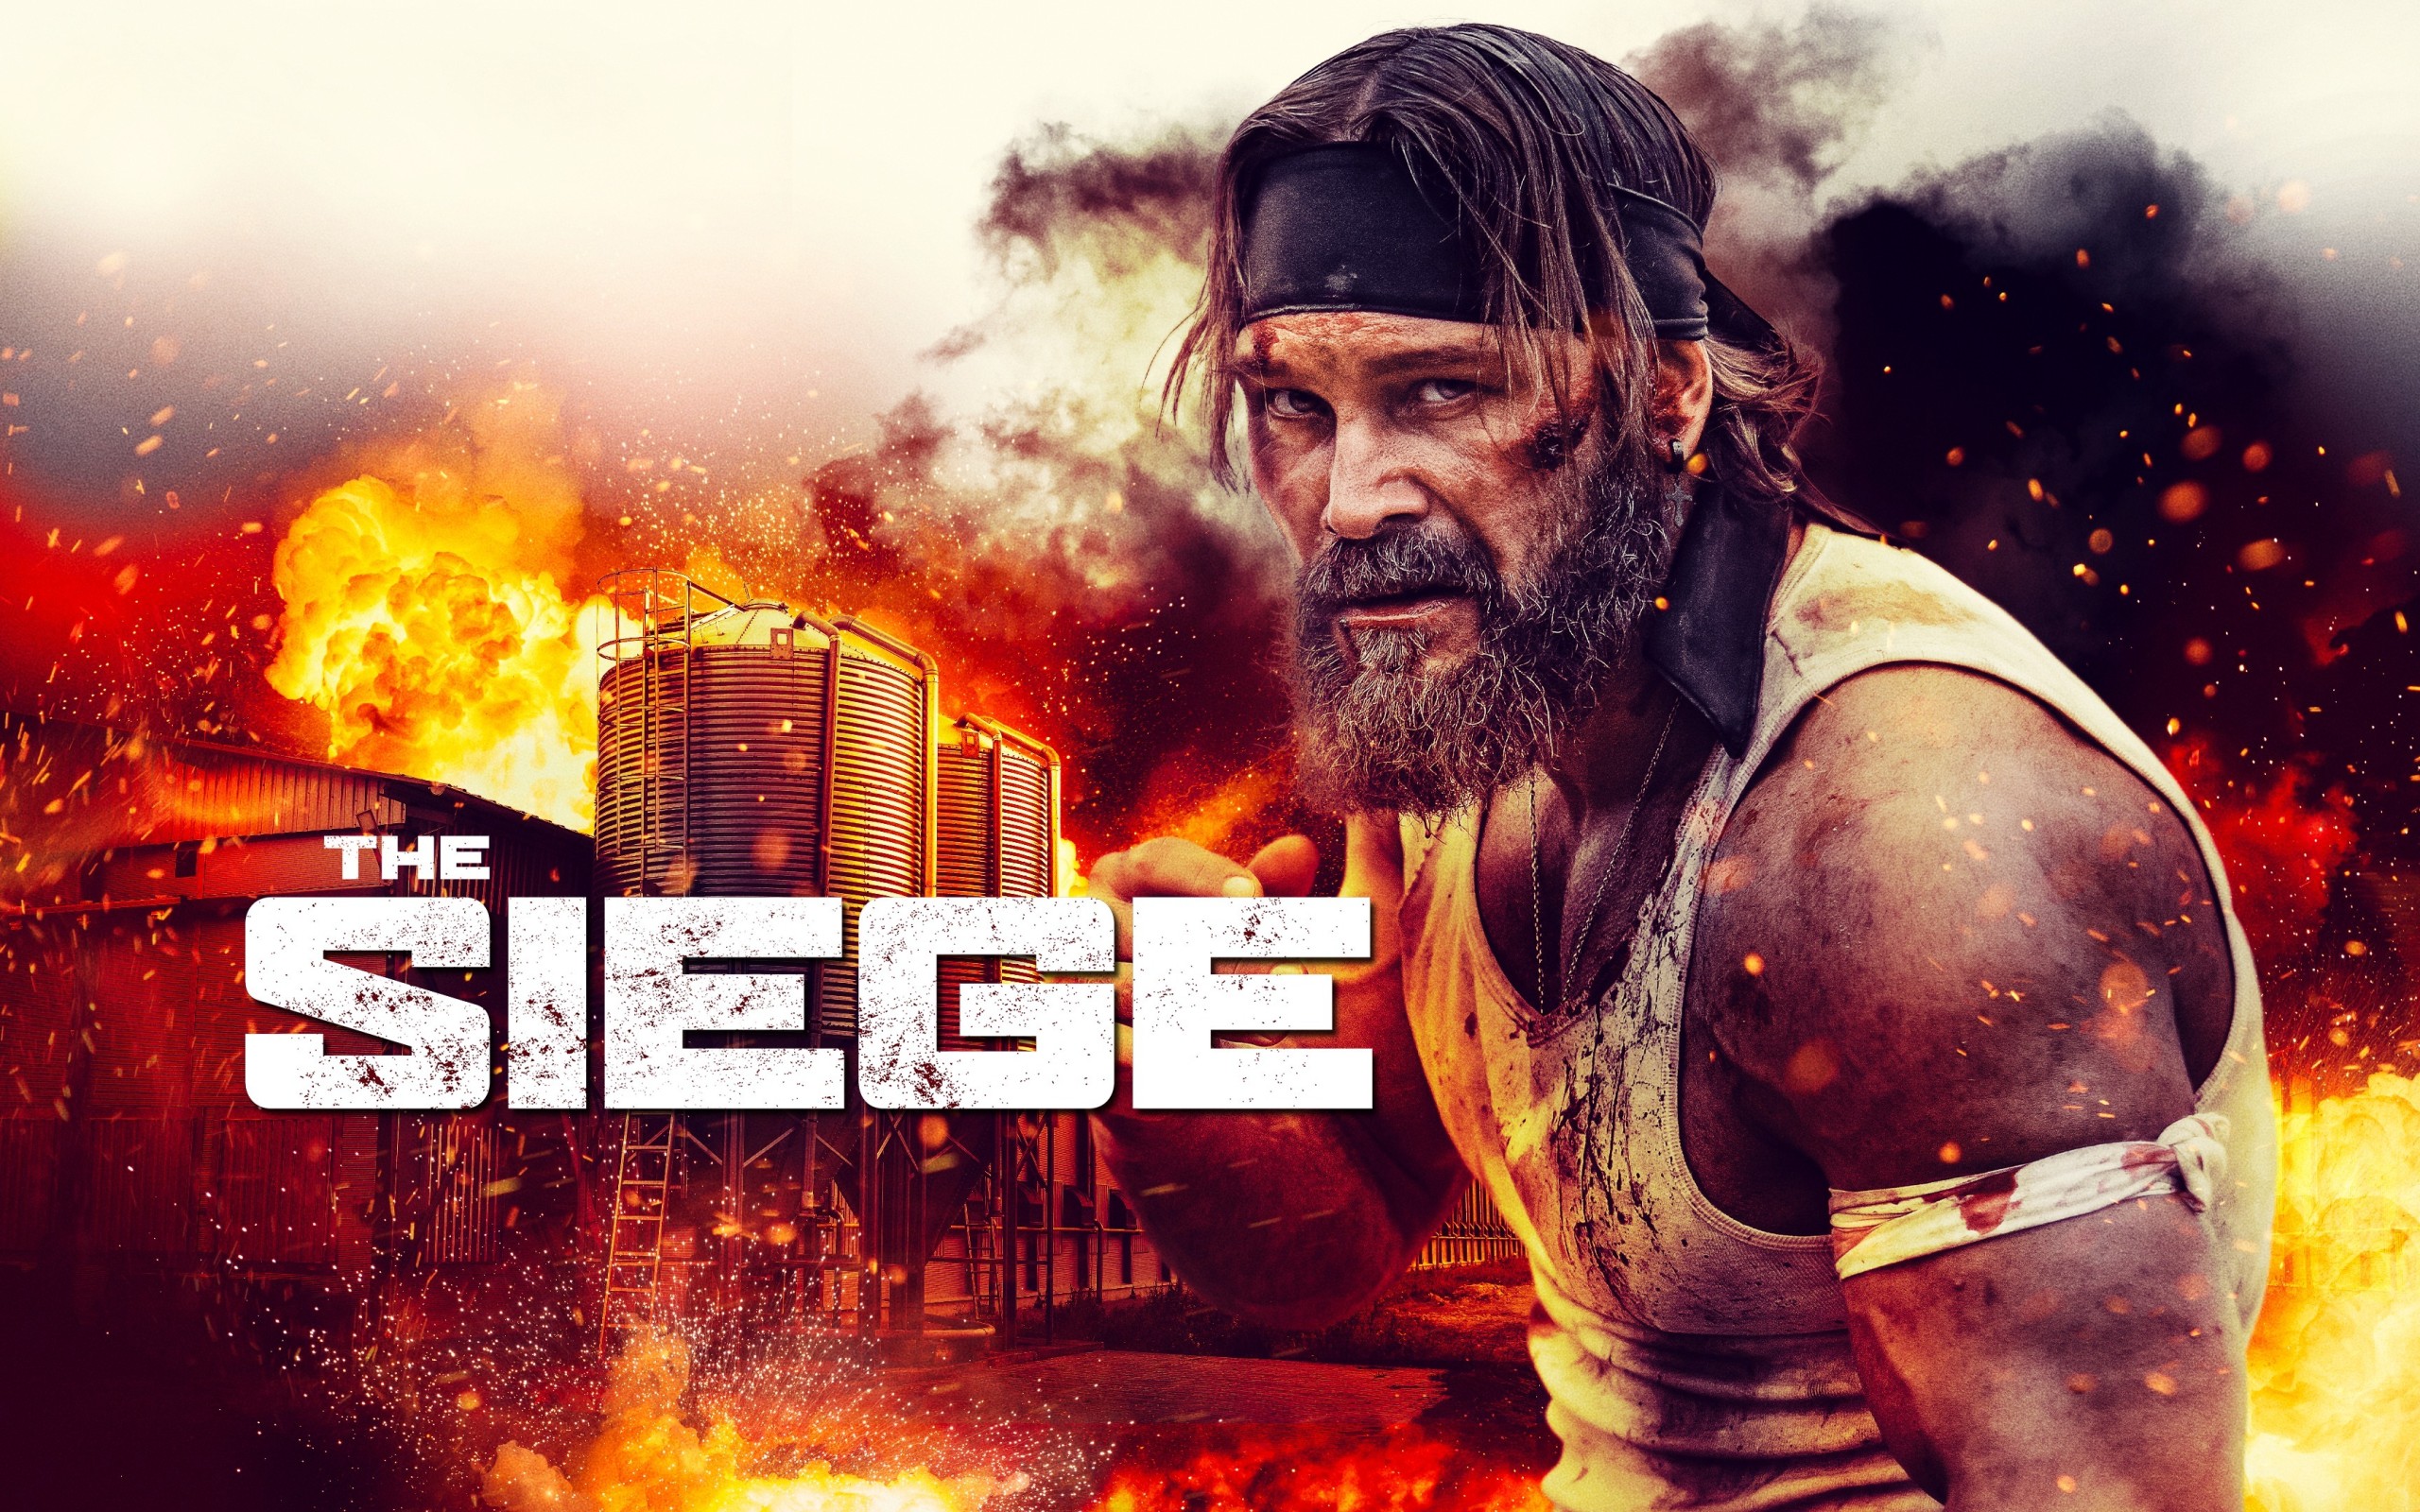 The Siege Review: A Brutally Action-Packed Thrill Ride